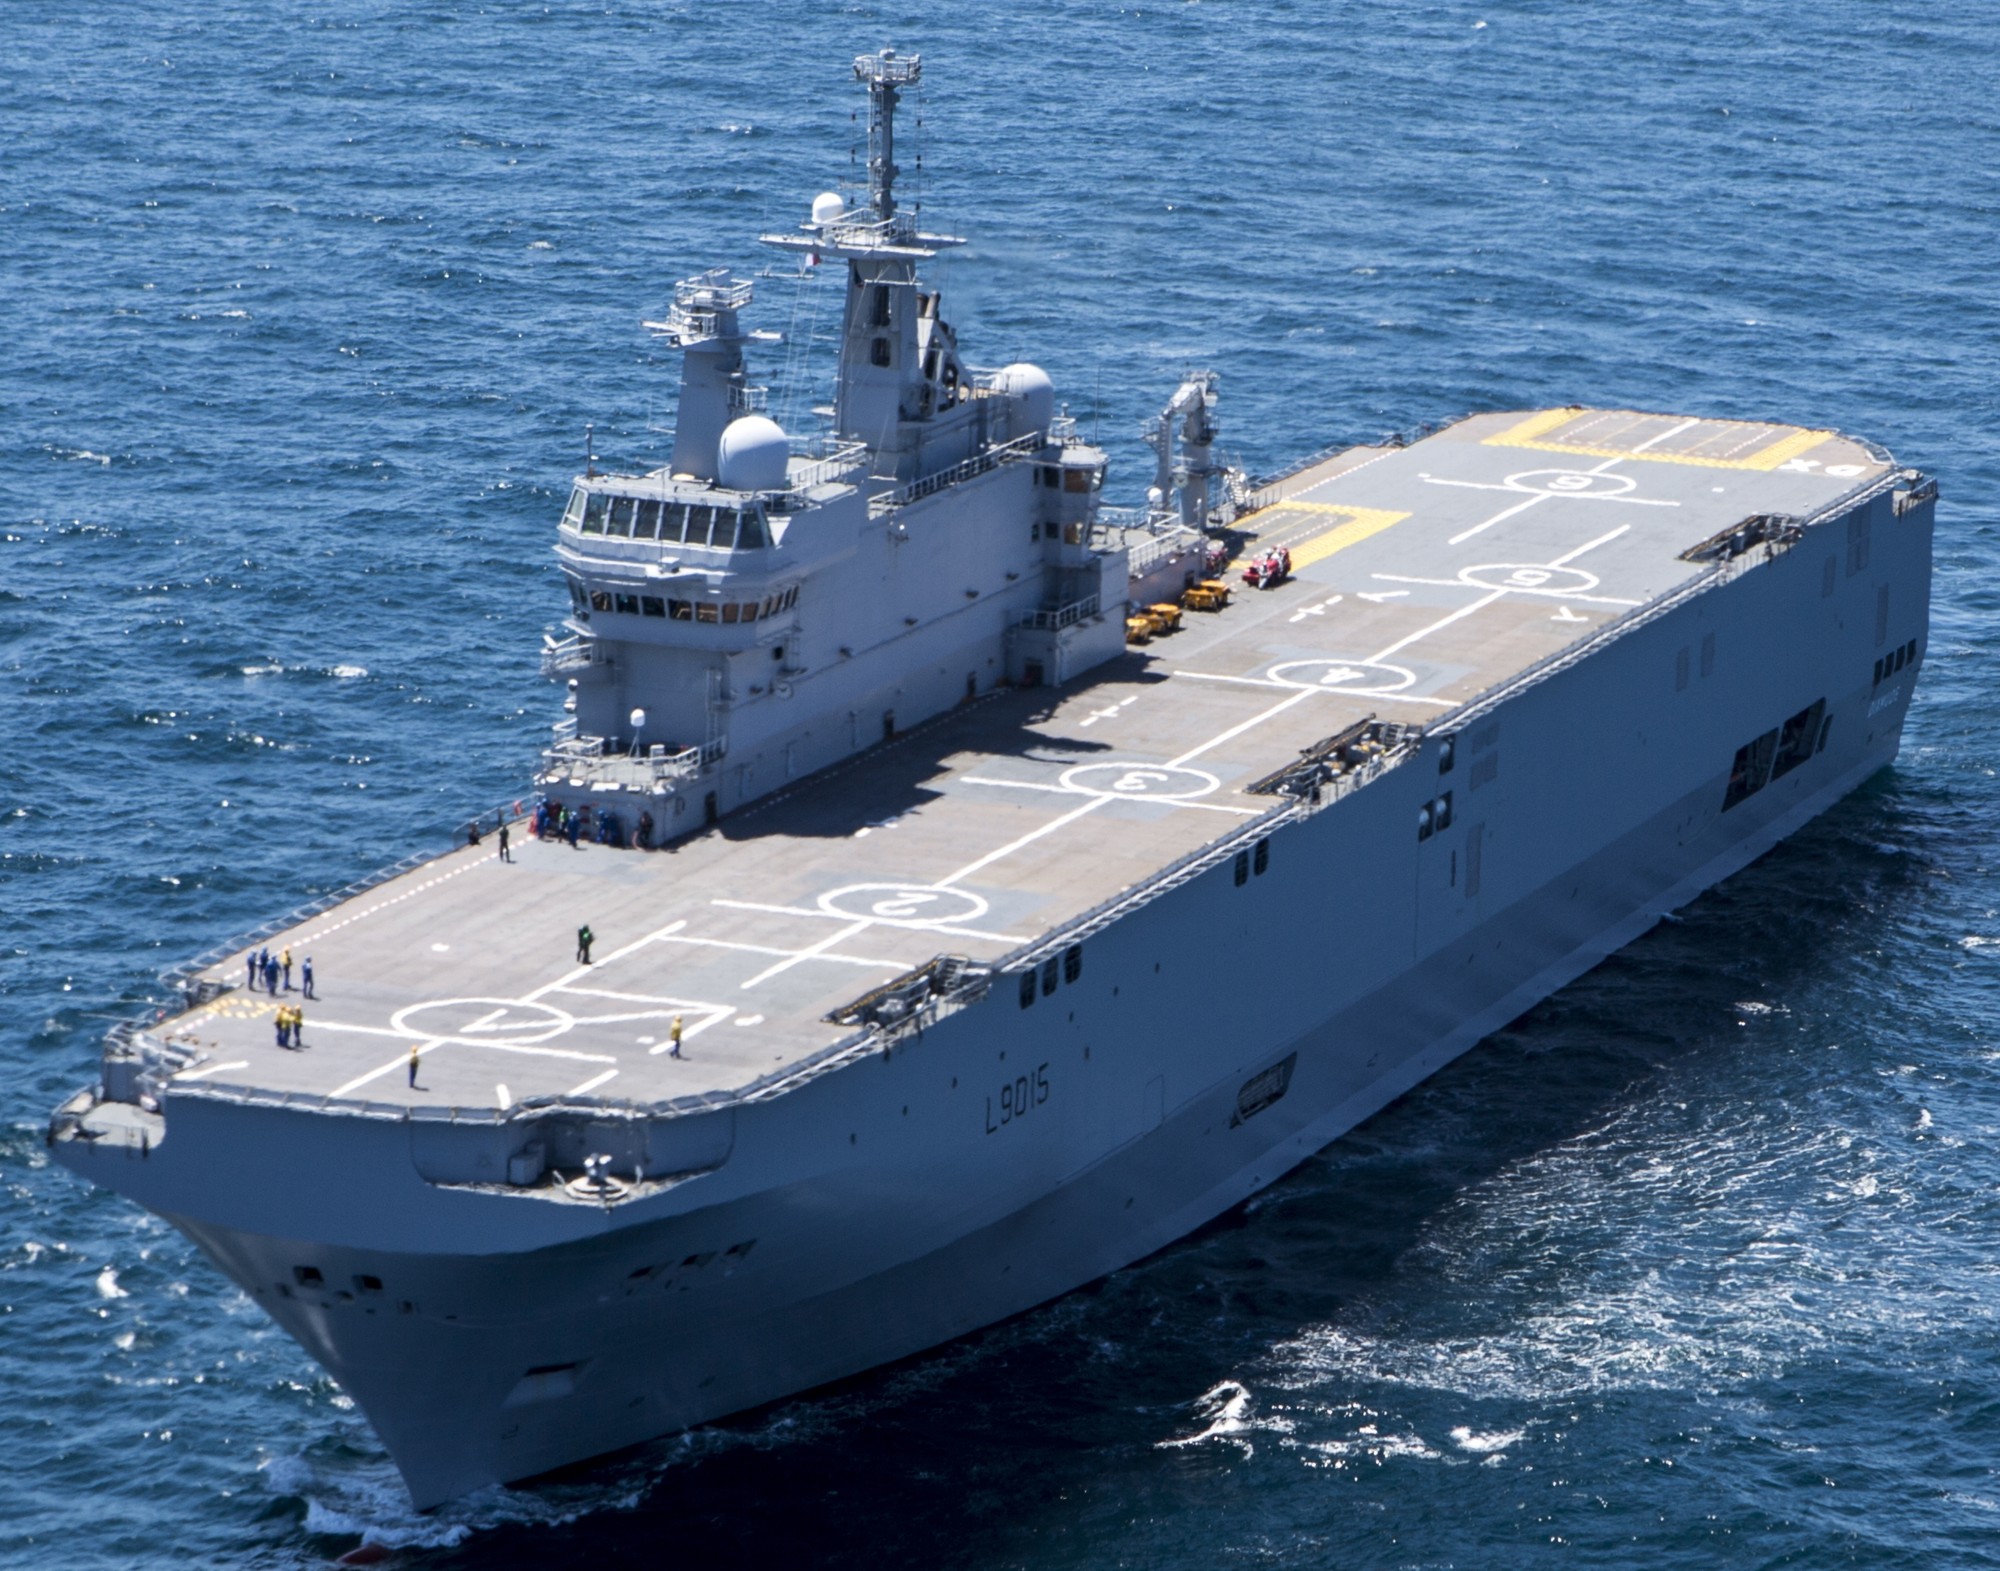 l-9015 fs dixmude mistral class amphibious assault command ship bpc french navy marine nationale 41